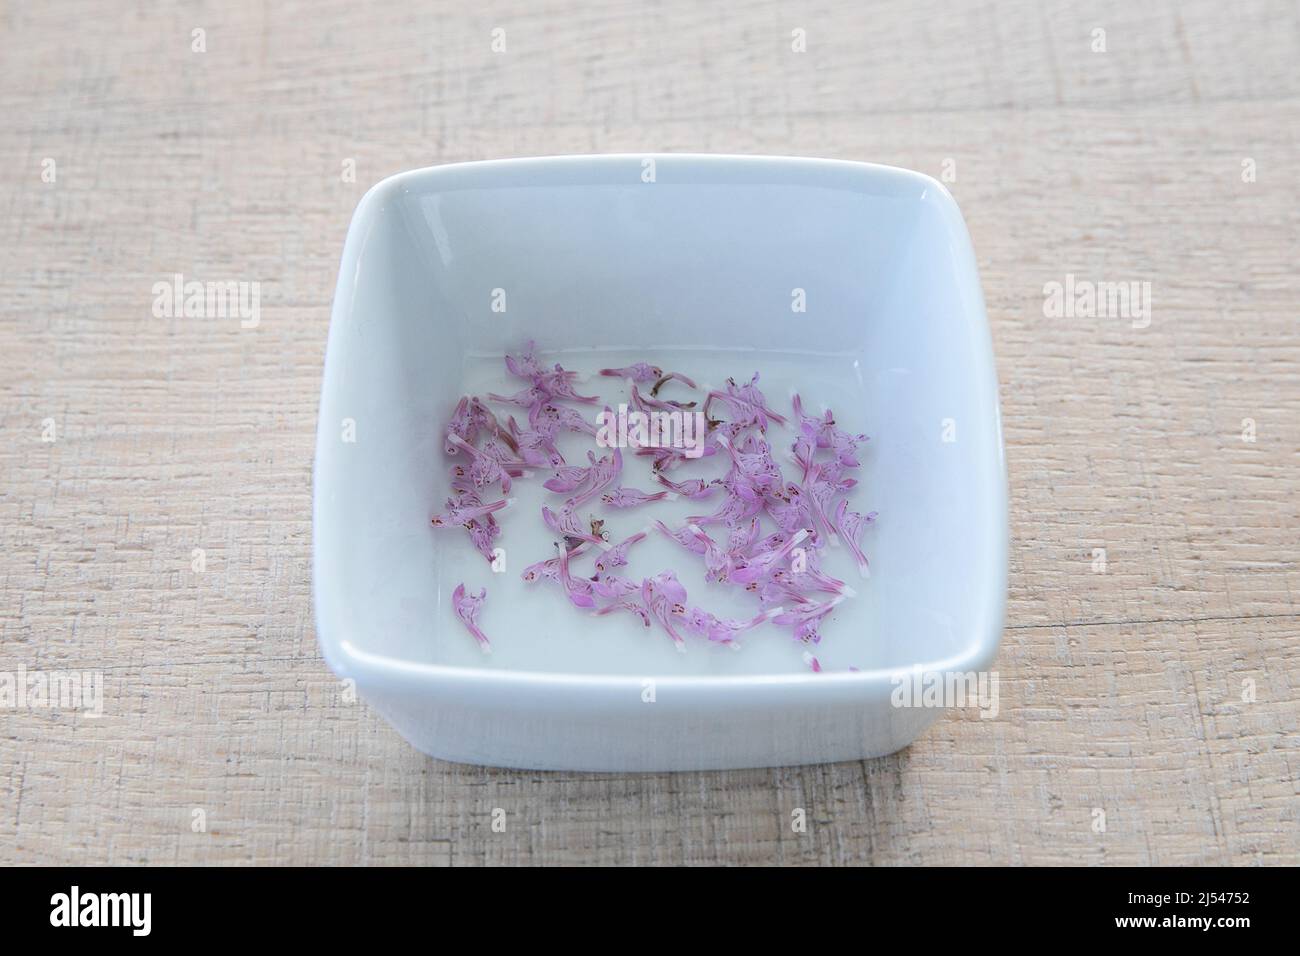 Fresh red dead nettle, lamium purpureum. Fresh flowers, pink flower petals on a kitchen table in a white cup. Hand picked flowers,medicinal Stock Photo